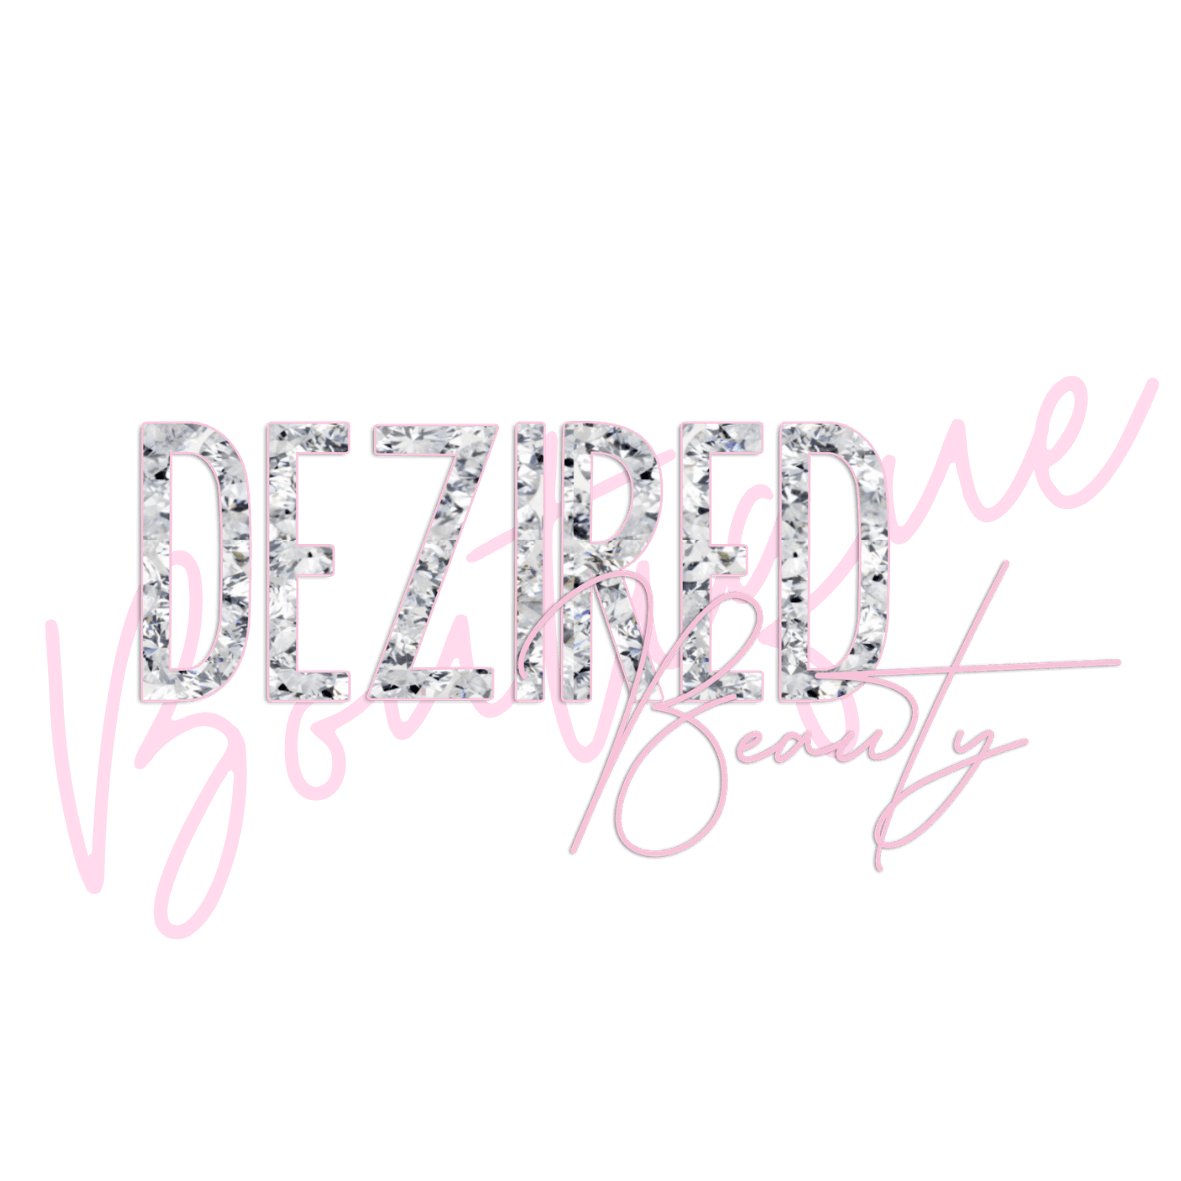 Dezired Beauty Gift Card - Dezired Beauty Boutique